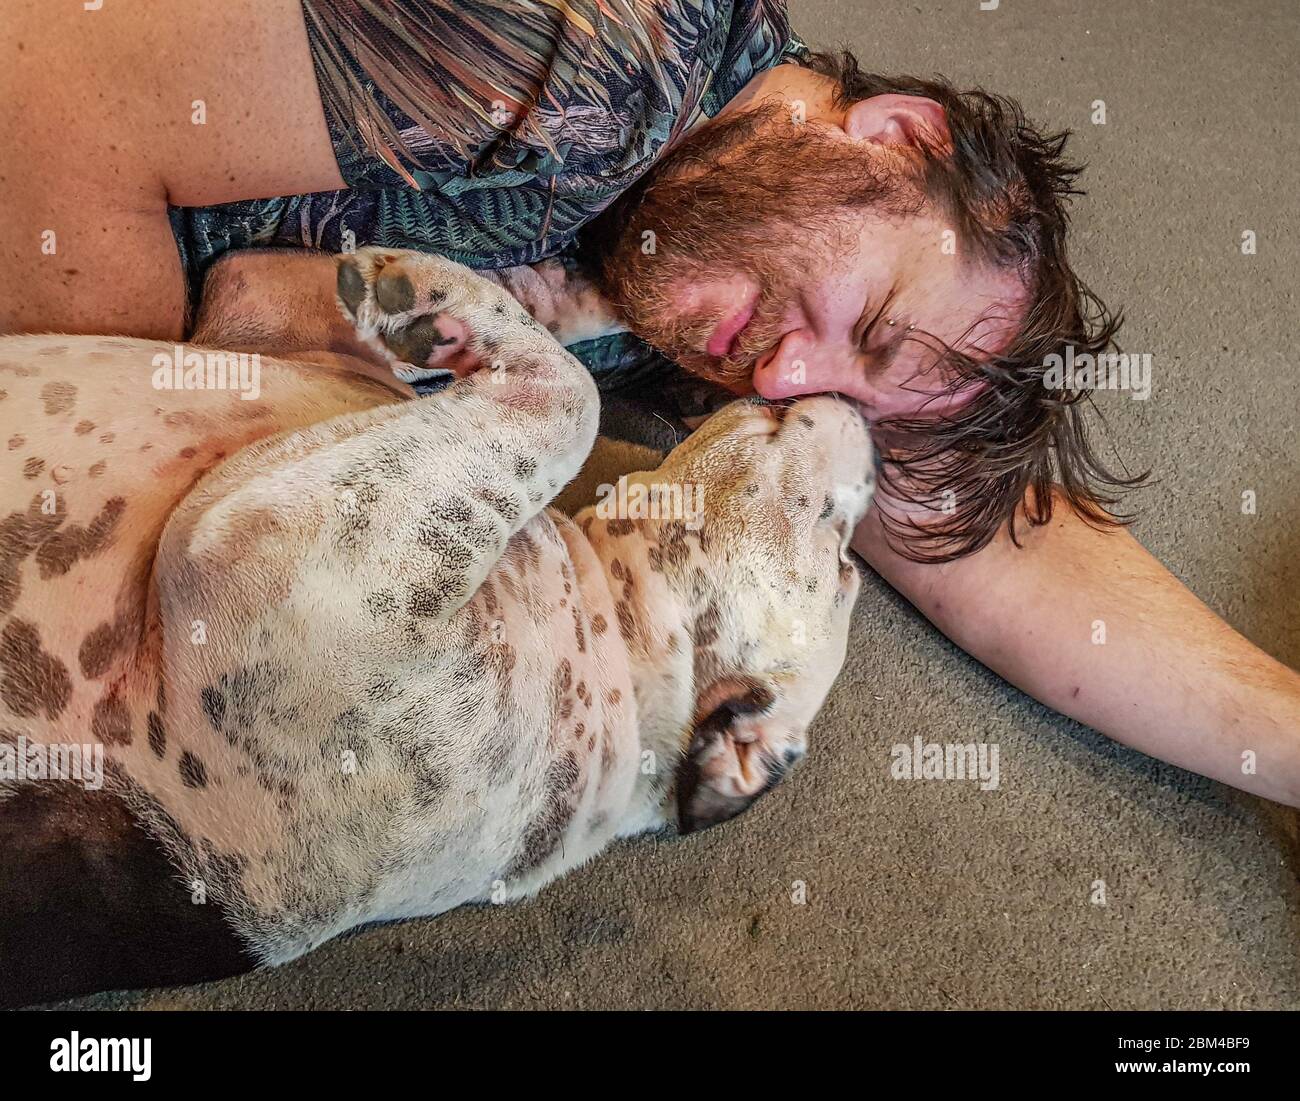 Dog licking owner's face Stock Photo